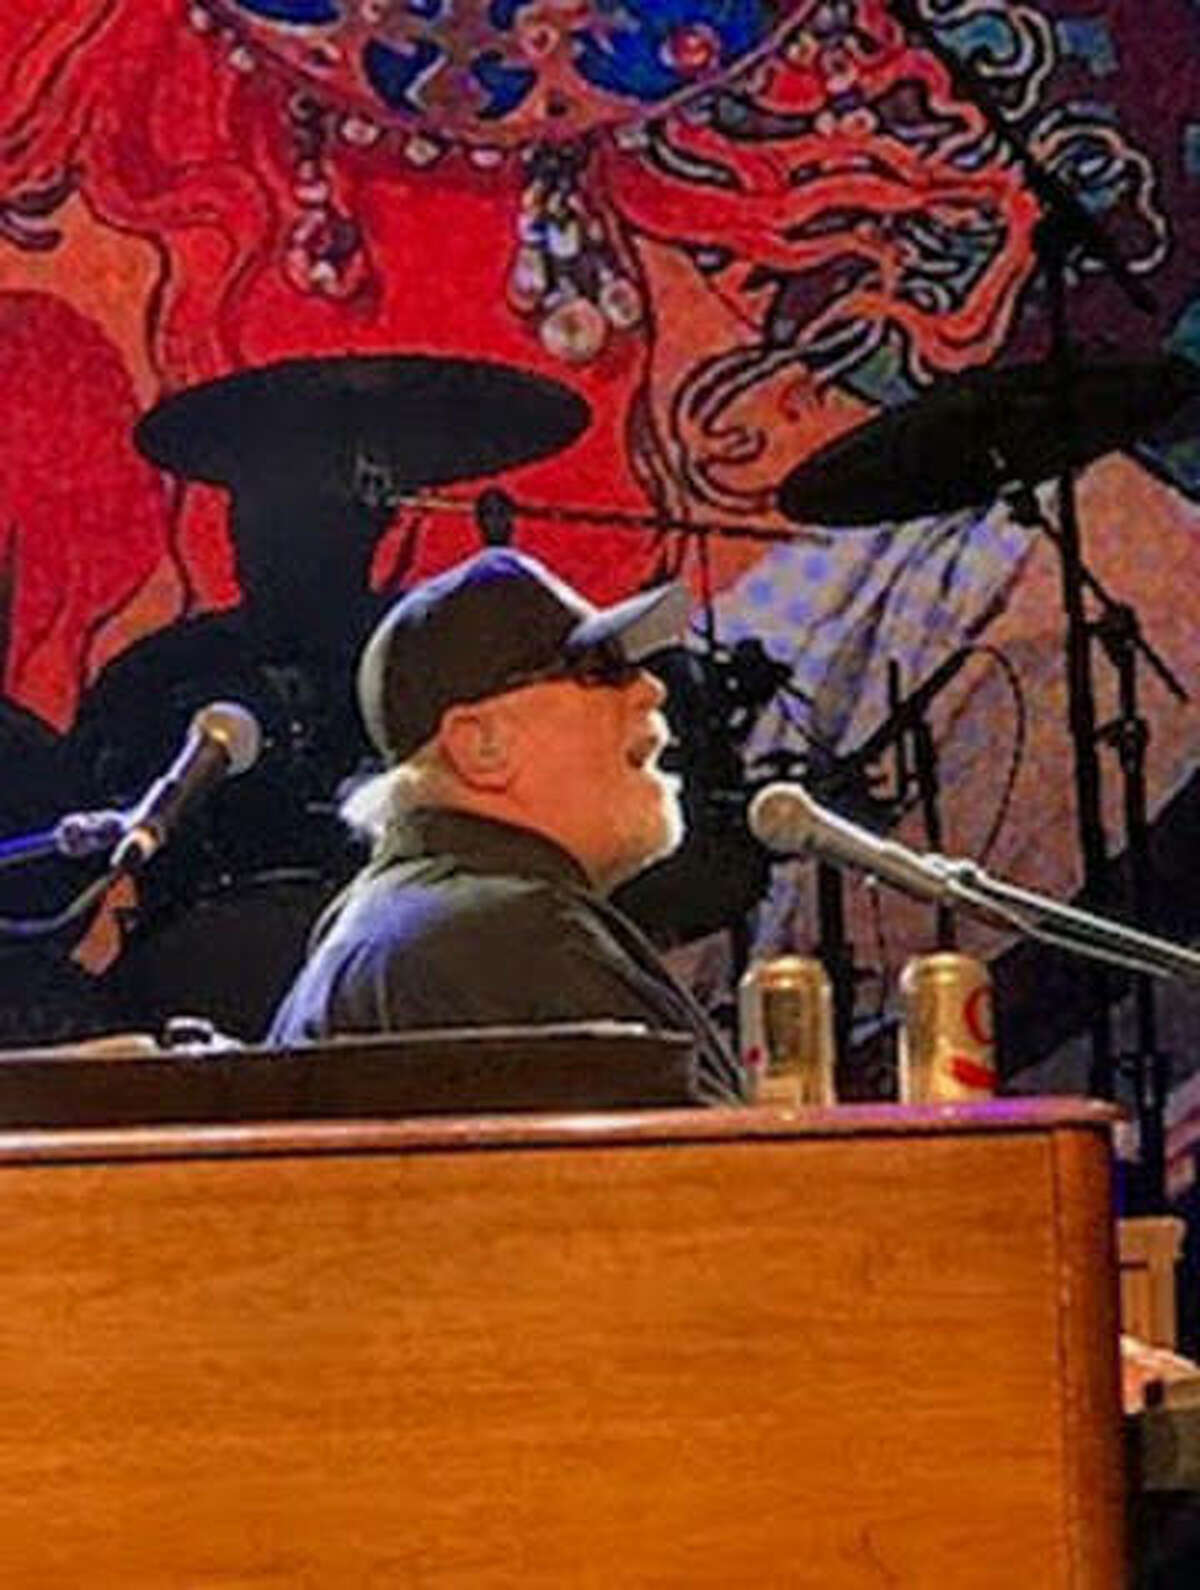 Gypsy vocalist and keyboardist James Walsh, a co-founder of the band, performs during a previous show at the Wildey Theatre.